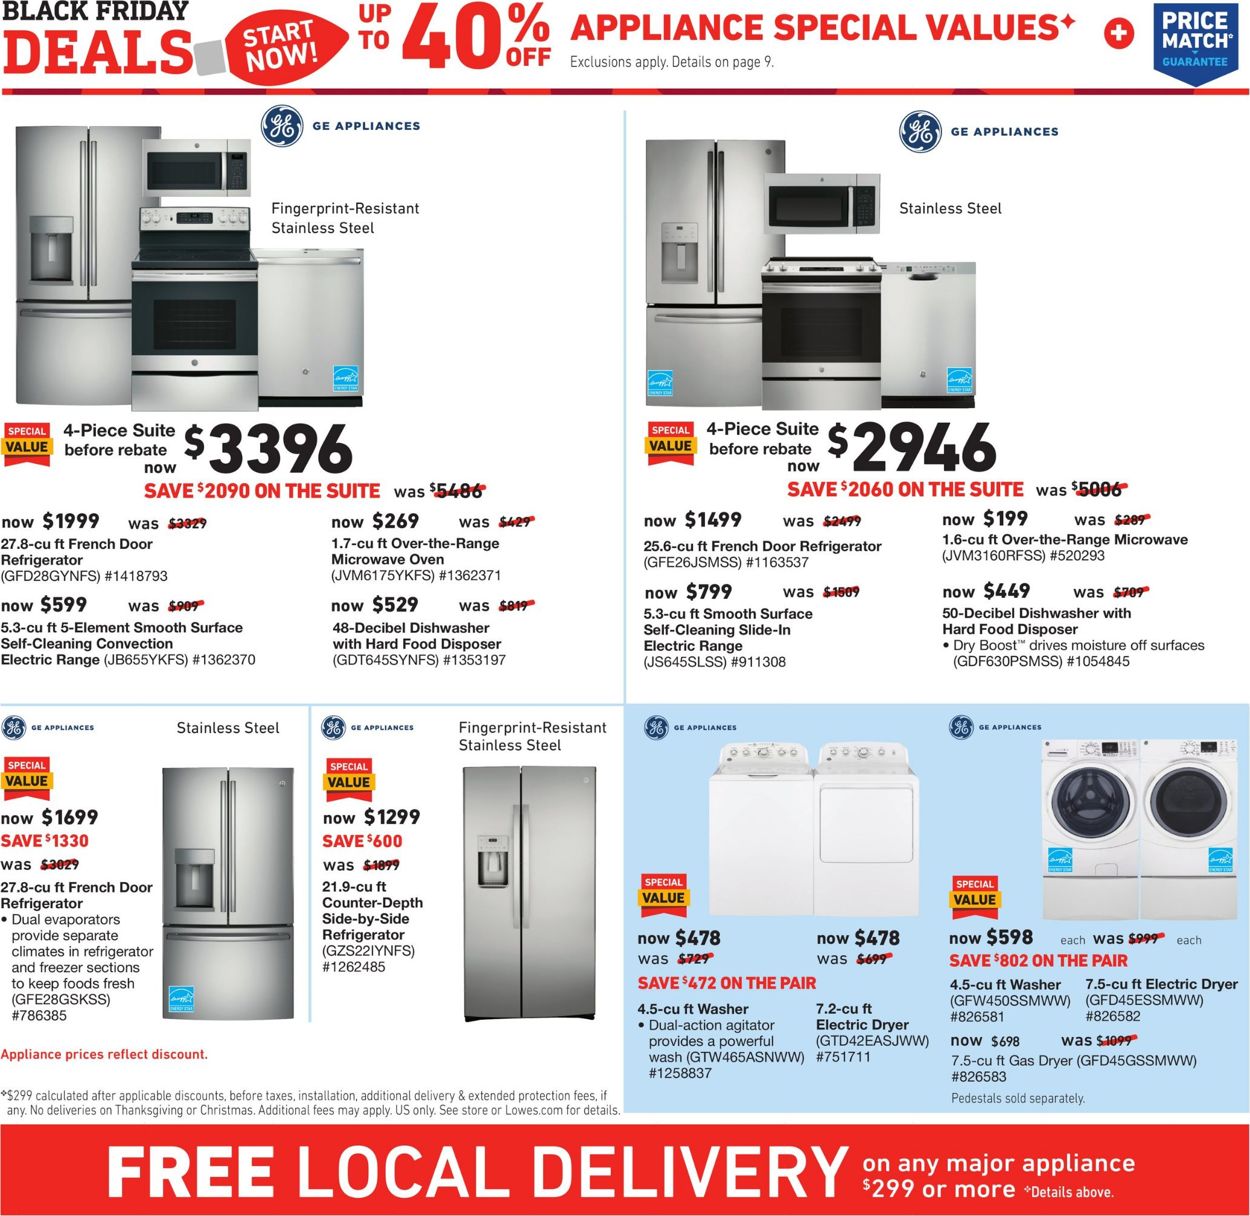 Lowe&#39;s - Black Friday Ad 2019 Current weekly ad 11/21 - 11/27/2019 [8] - www.bagssaleusa.com/louis-vuitton/